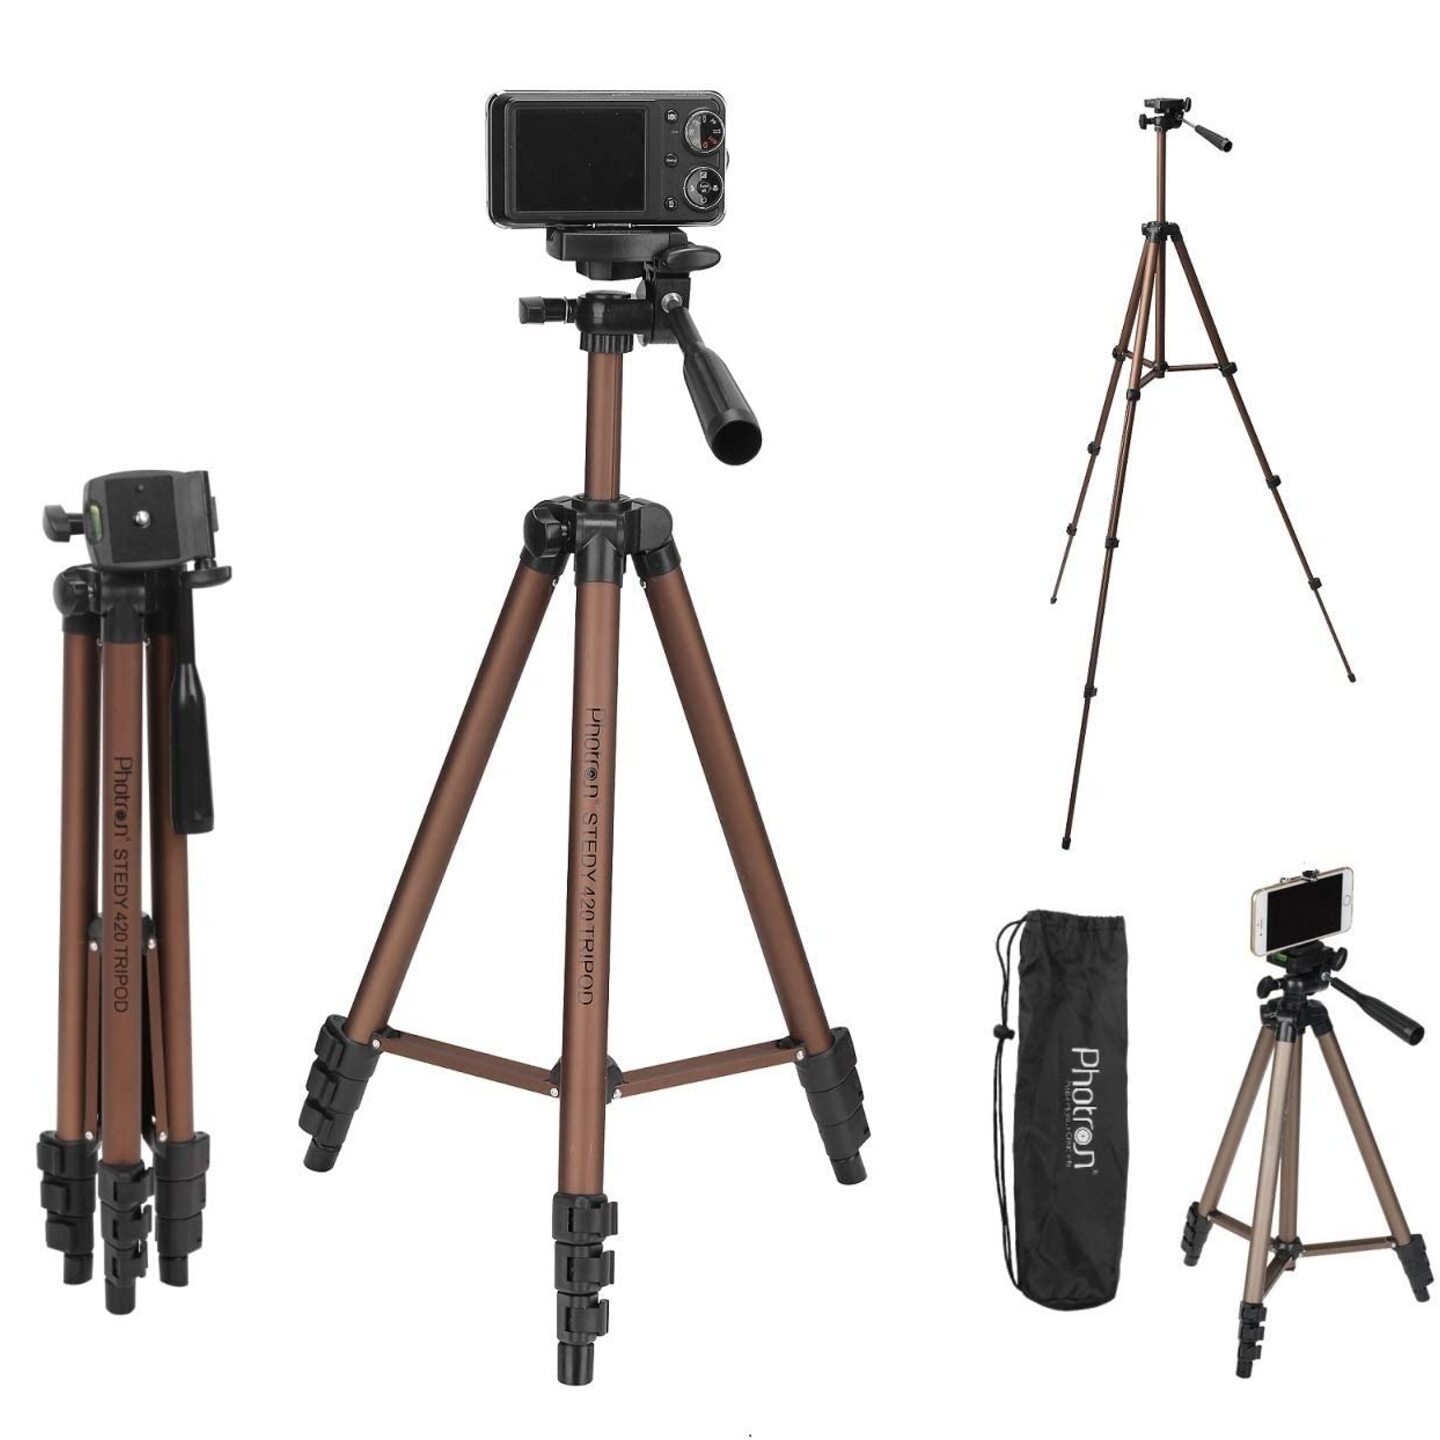 Photron Stedy 420 Tripod (50 Inch) for Smart Phone, Camera - Load 2.5 KG